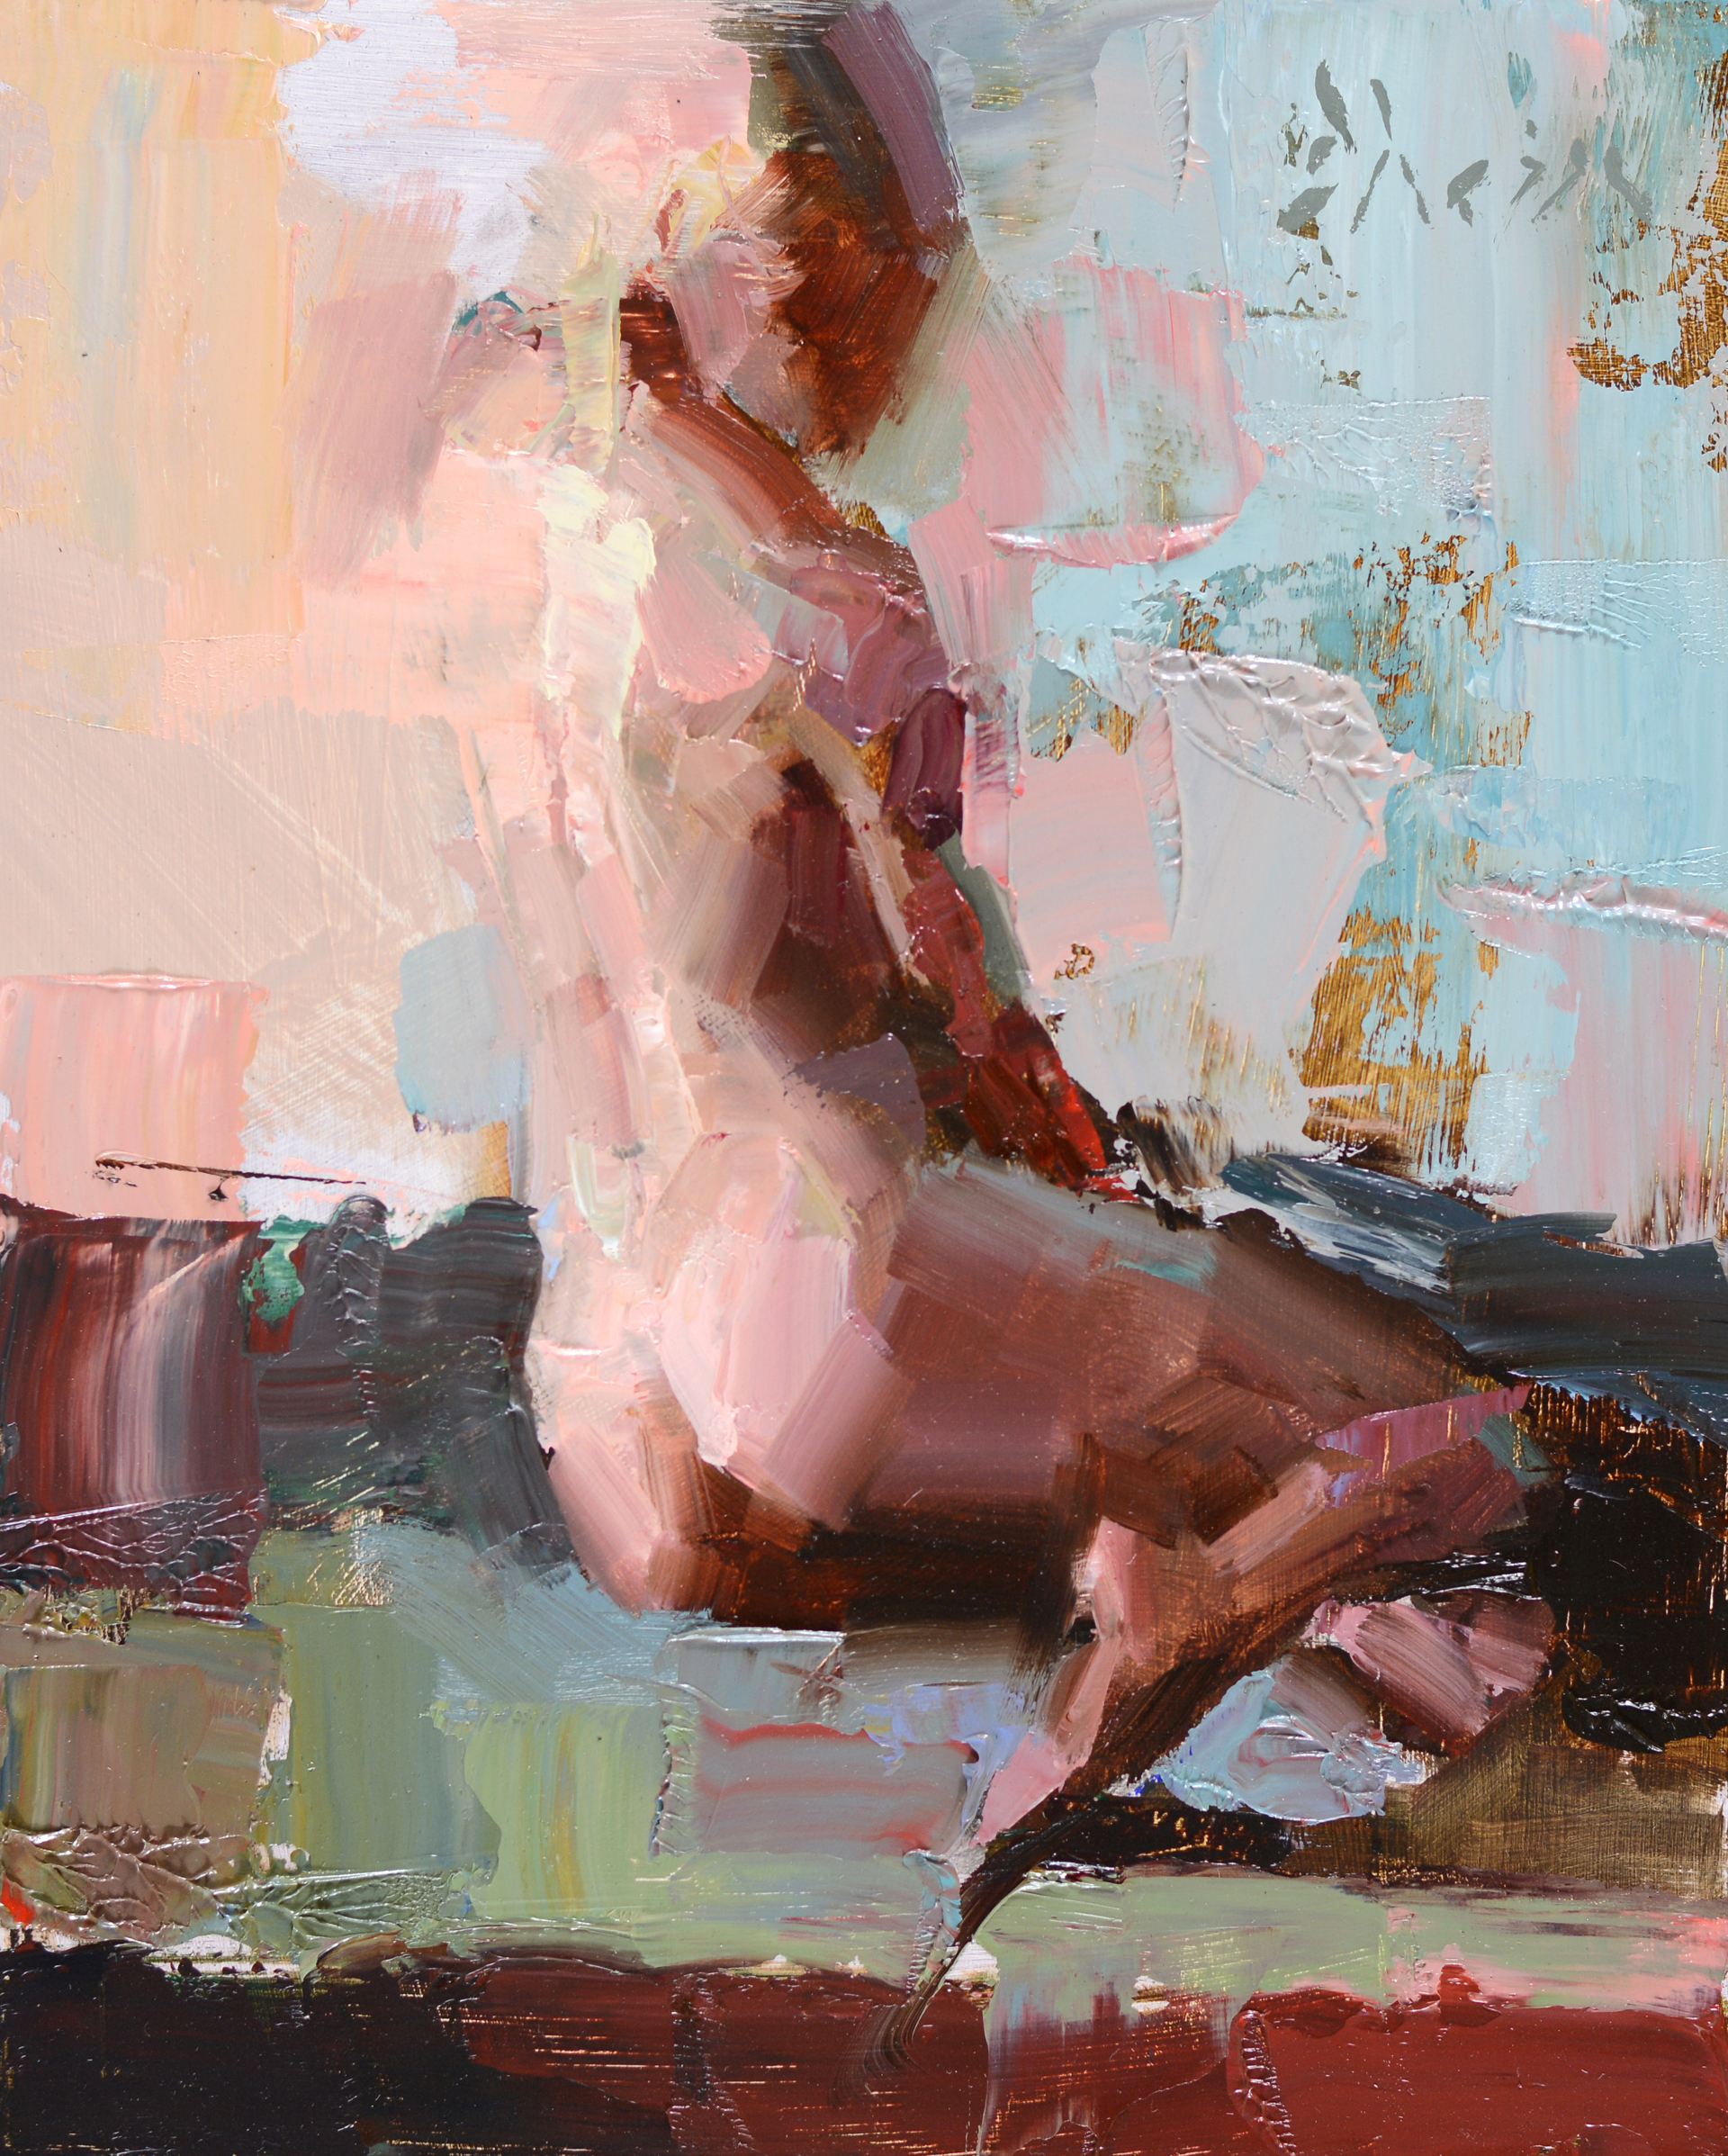 Nude Study 1 by Jacob Dhein